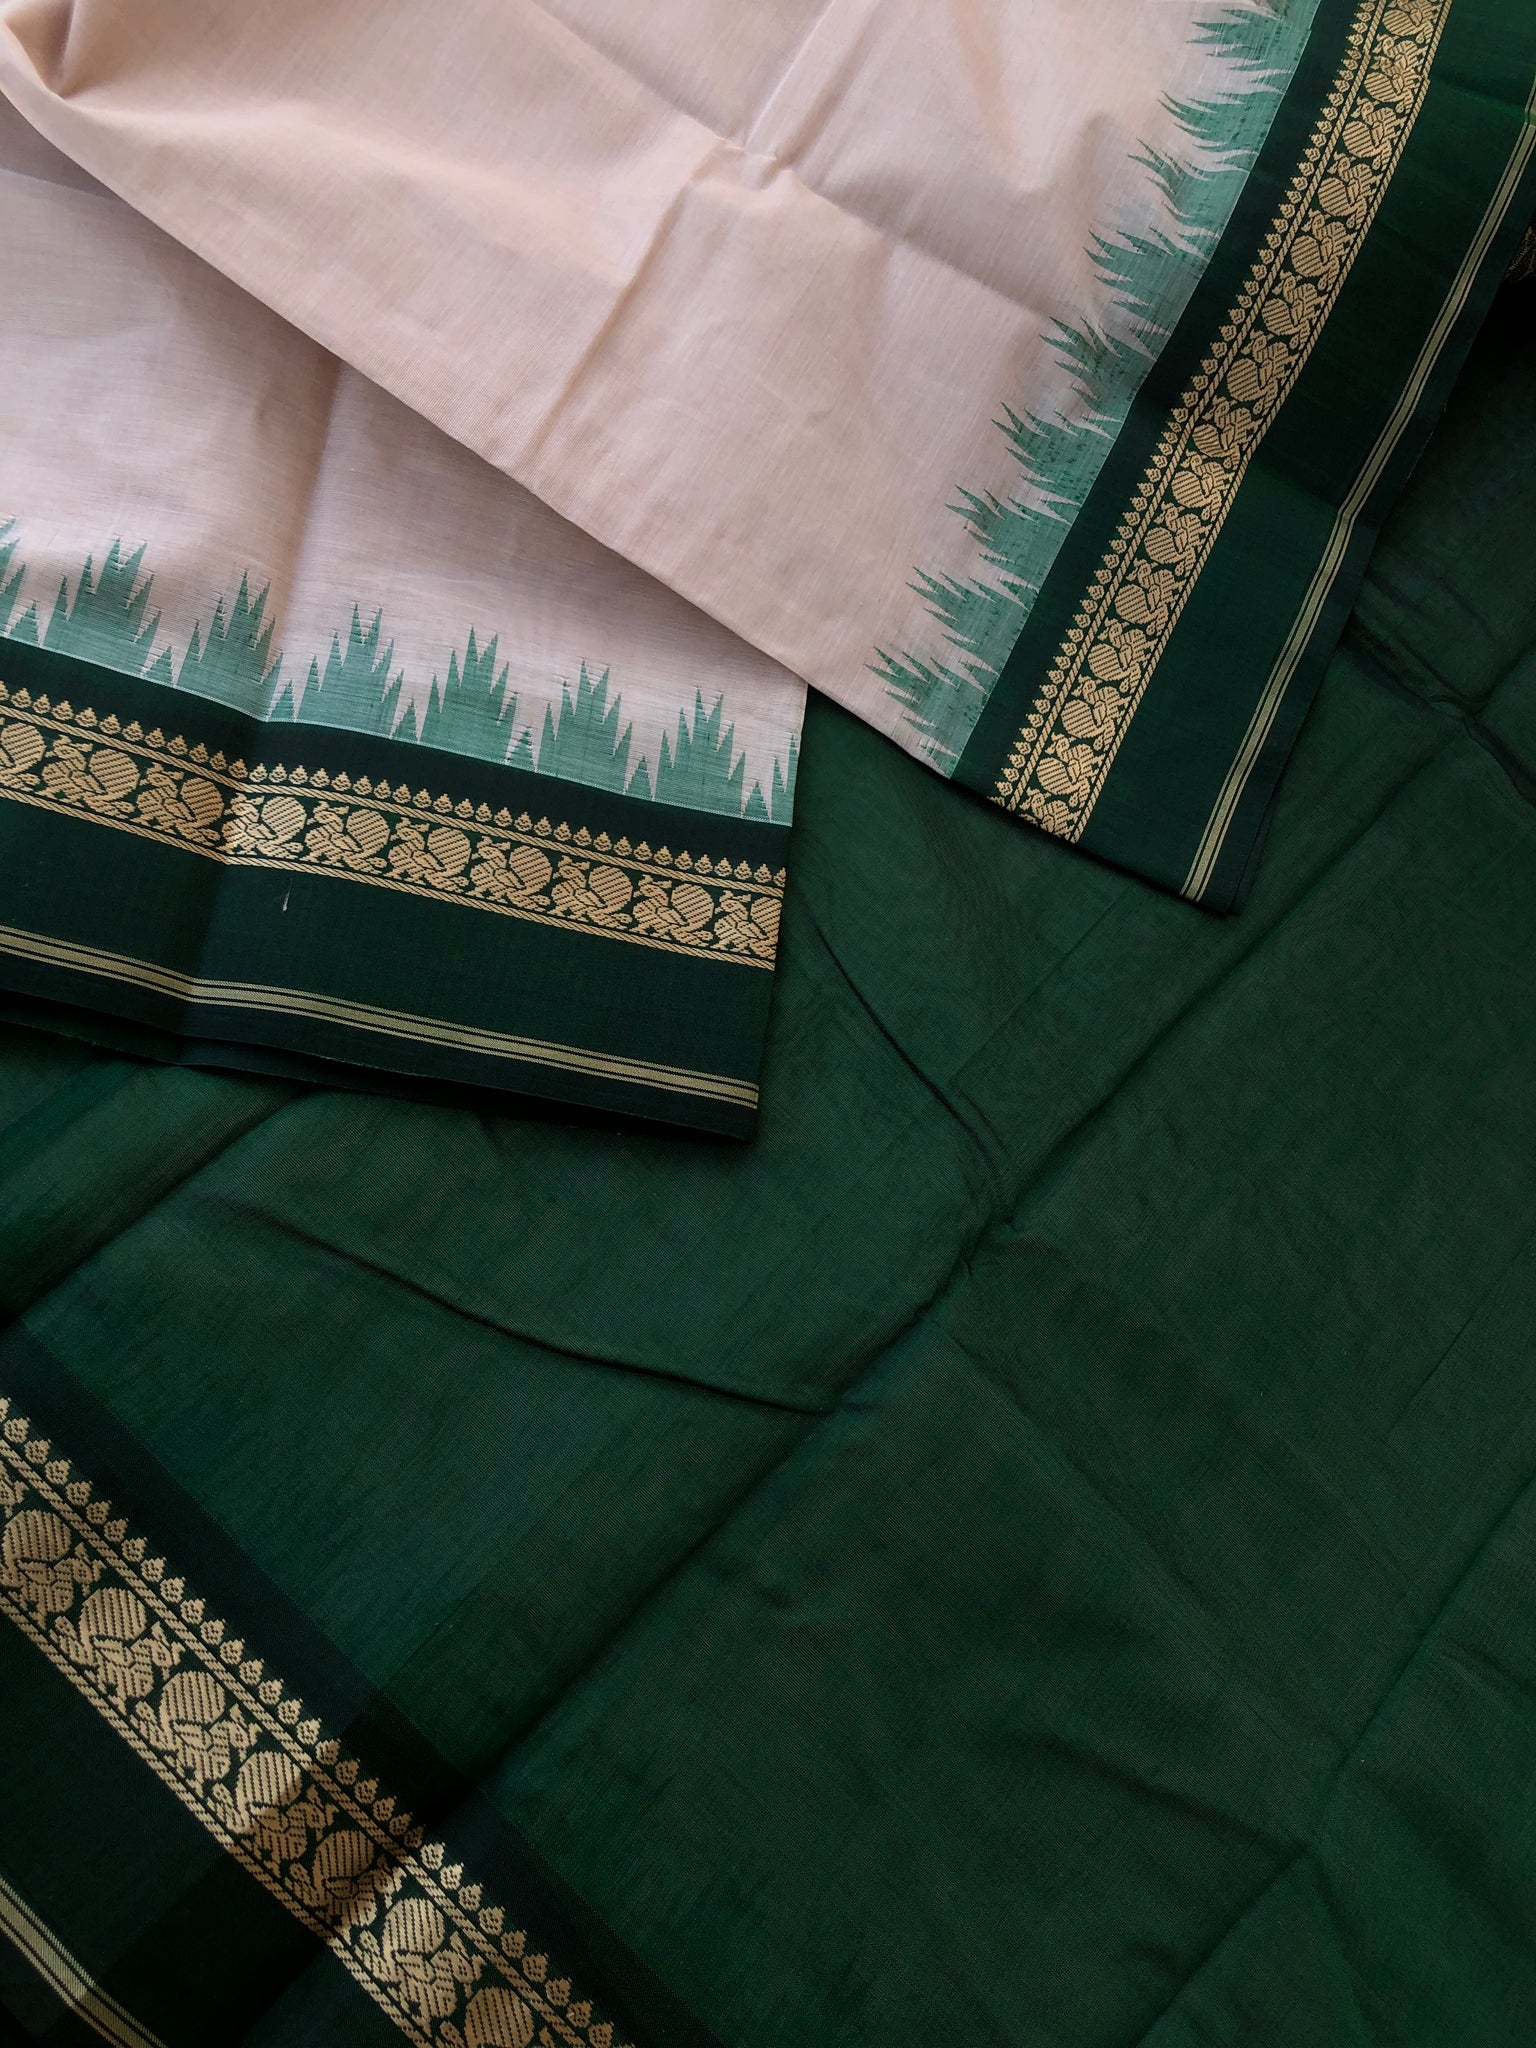 Cotton body with Pure Silk Borders - beige and deepest Meenakshi green is at the most beautiful